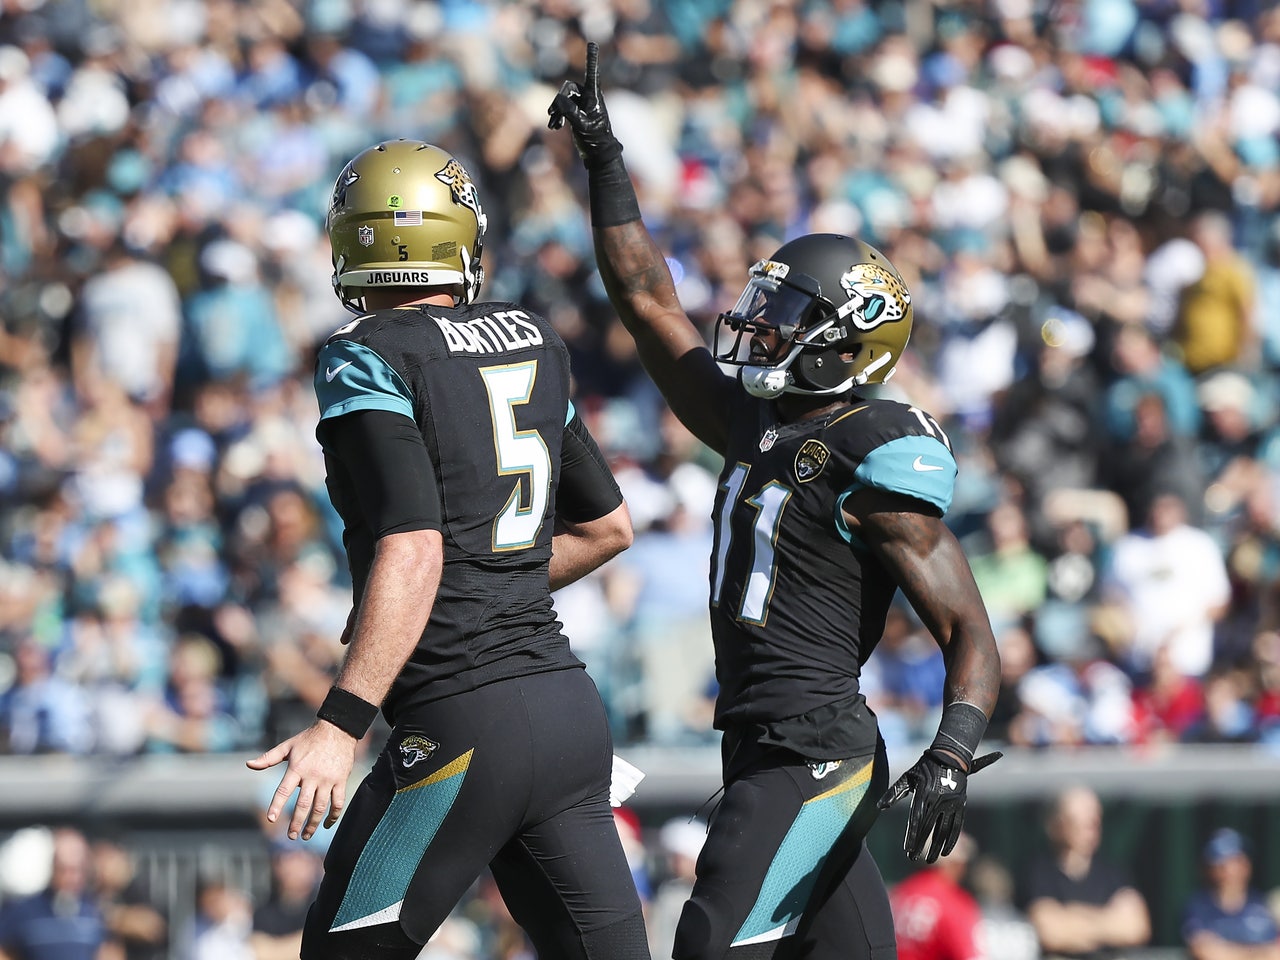 Jacksonville Jaguars reverting to teal as primary home jersey color